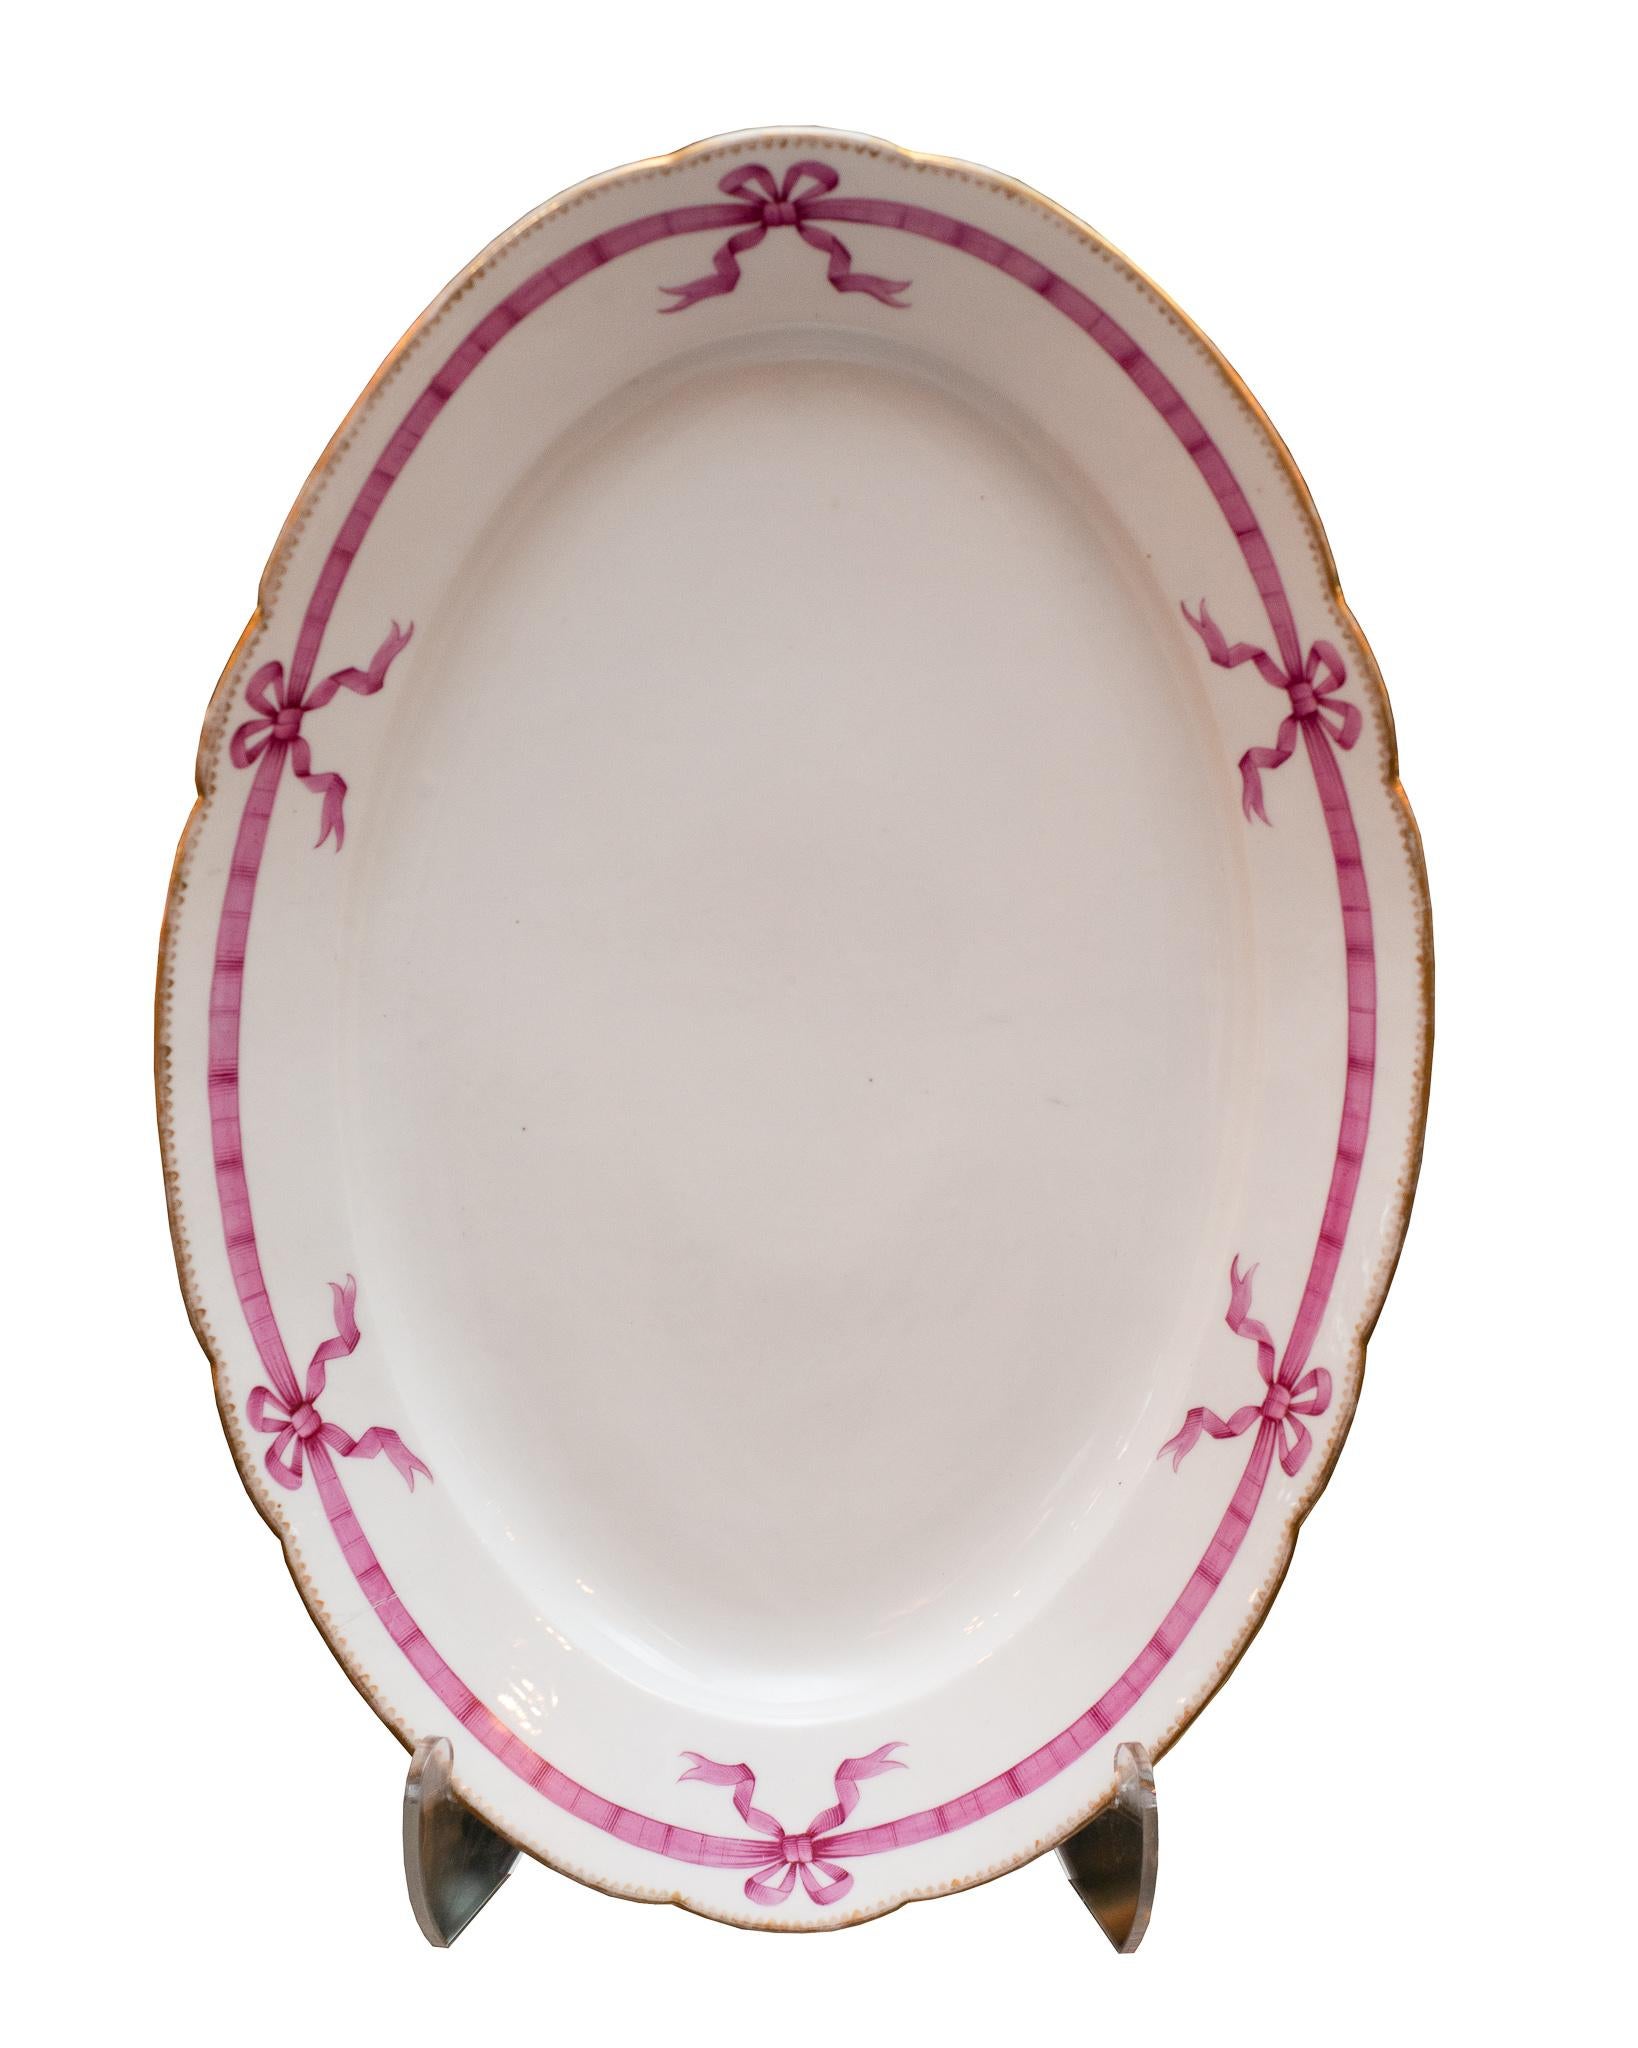 19th Century Antique French 22-Piece White Porcelain Dinner Set with Pink Ribbon Motif